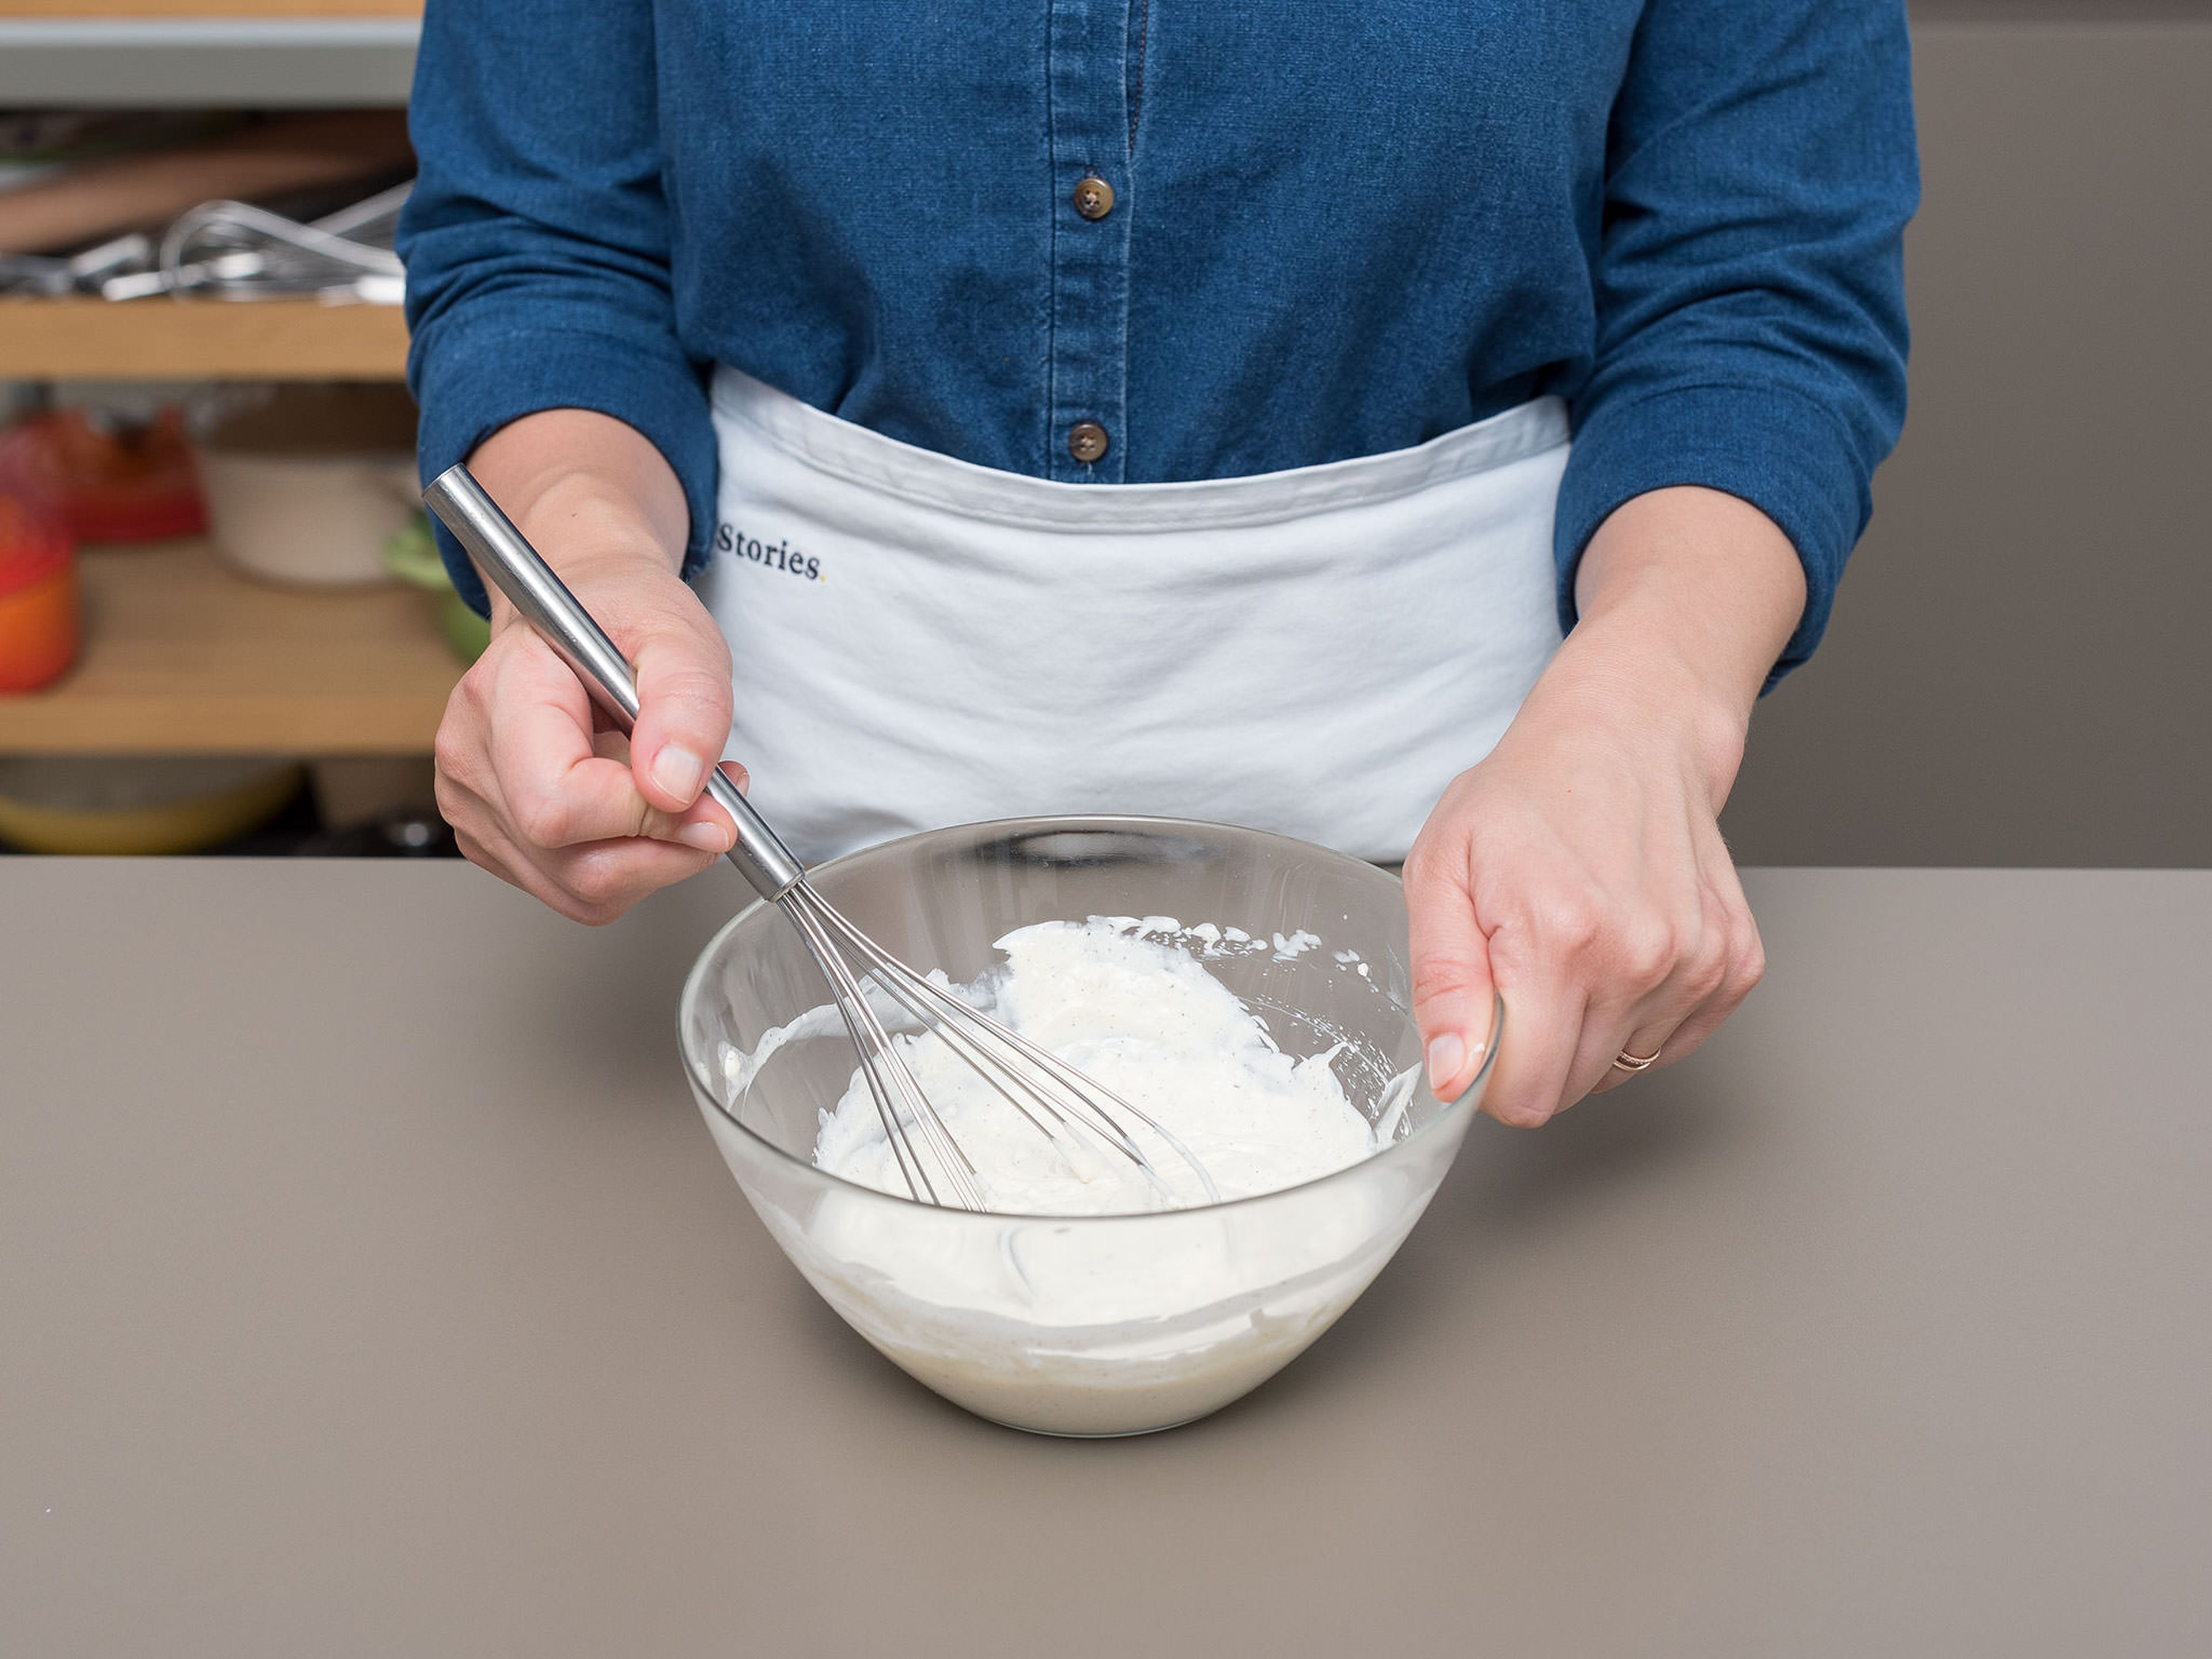 Whisk the mascarpone cheese, milk, and remaining vanilla sugar in a small bowl. Remove cake base from the oven and let it cool down.